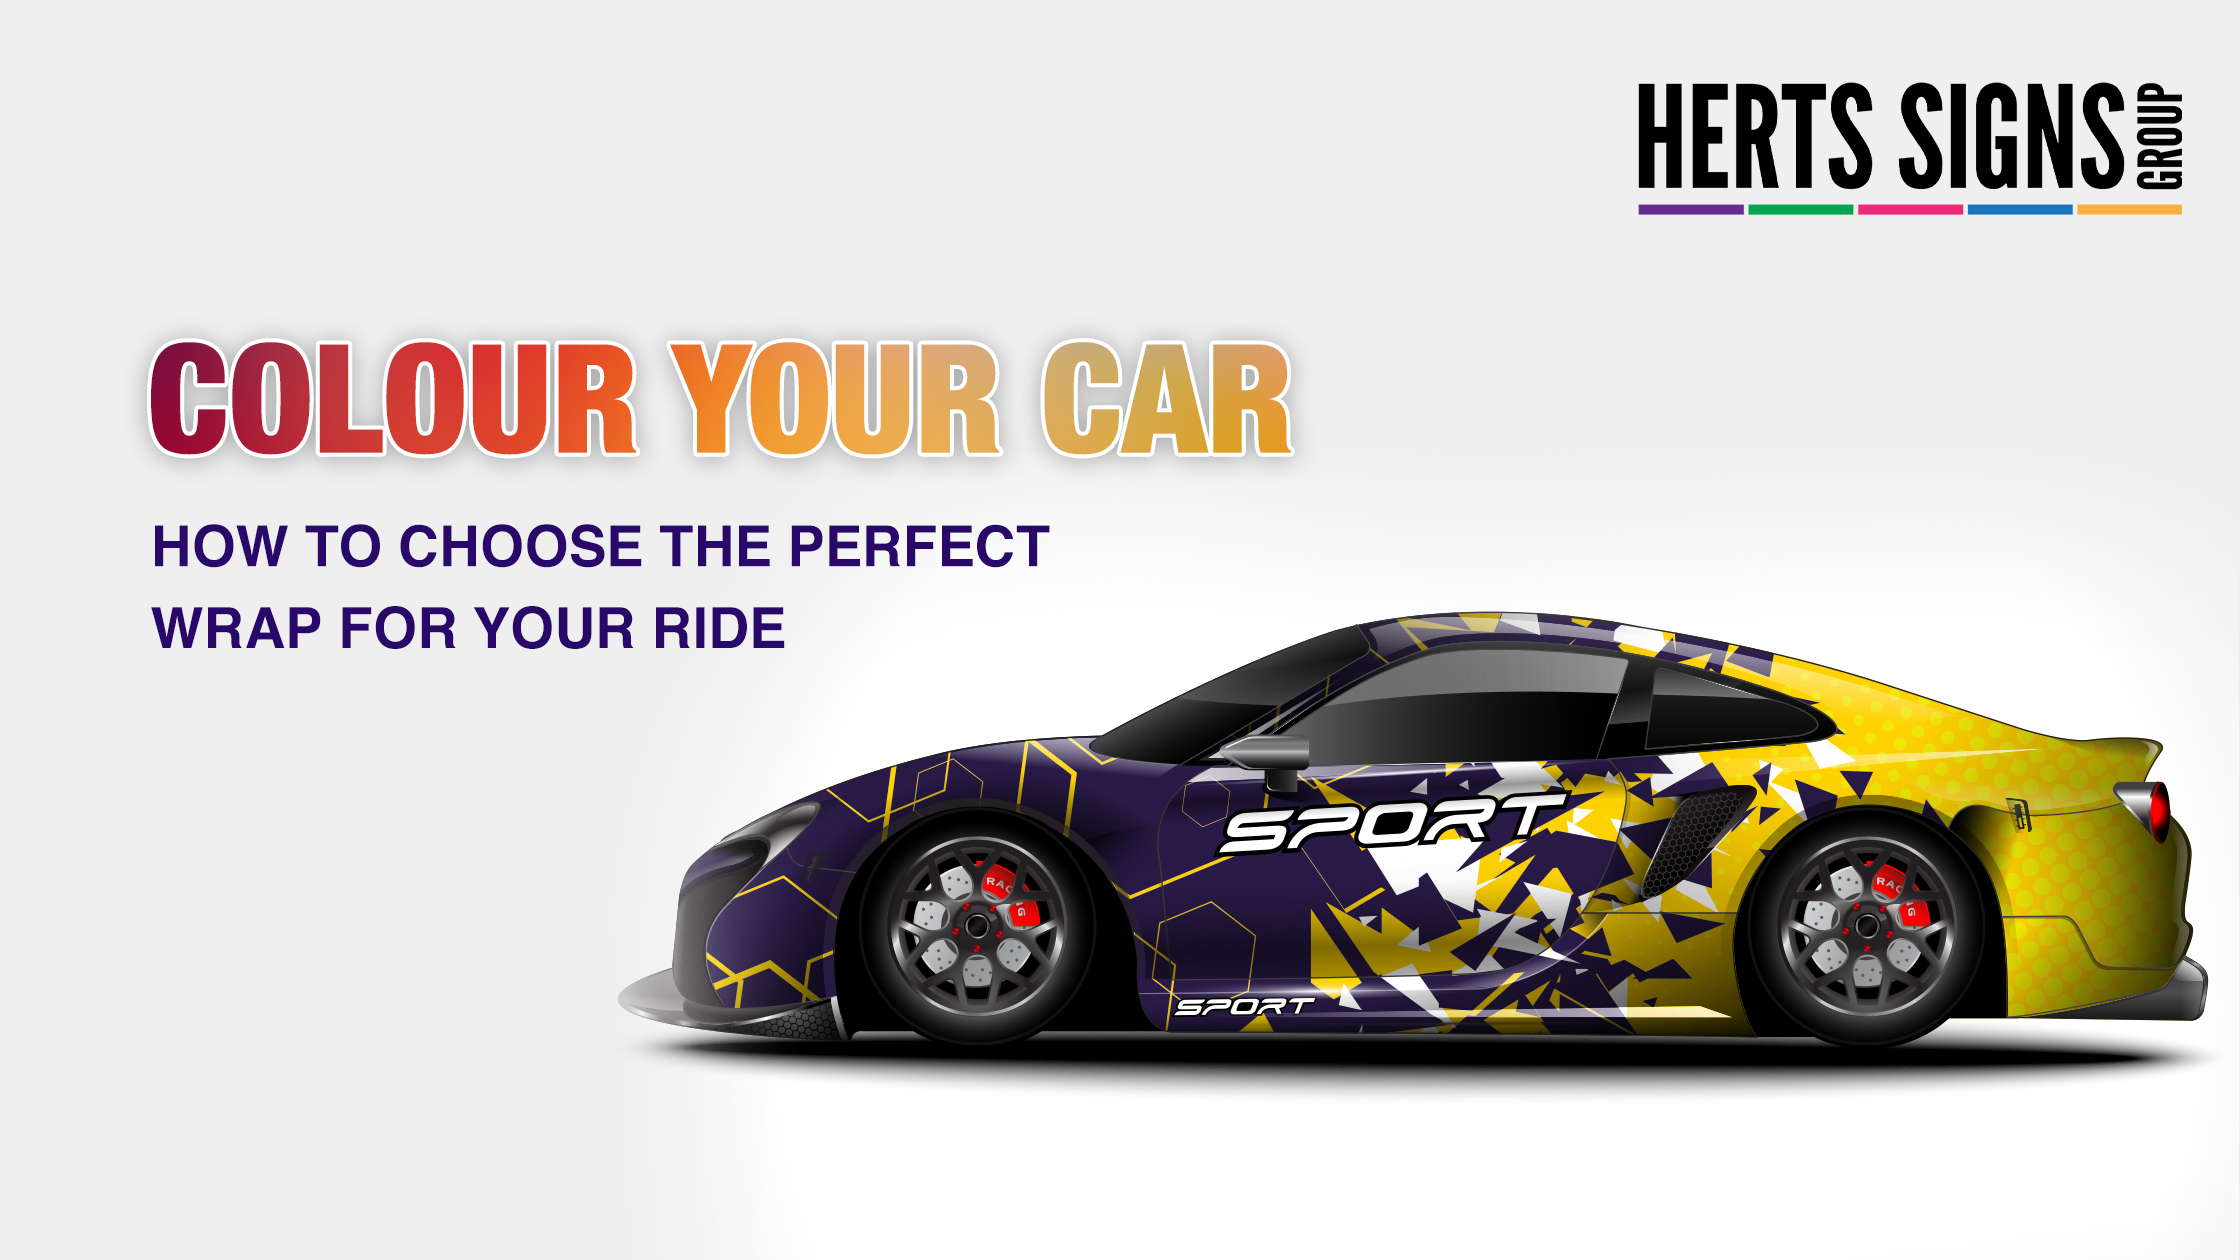 Colour Your Car: How to Choose the Perfect Wrap for Your Ride